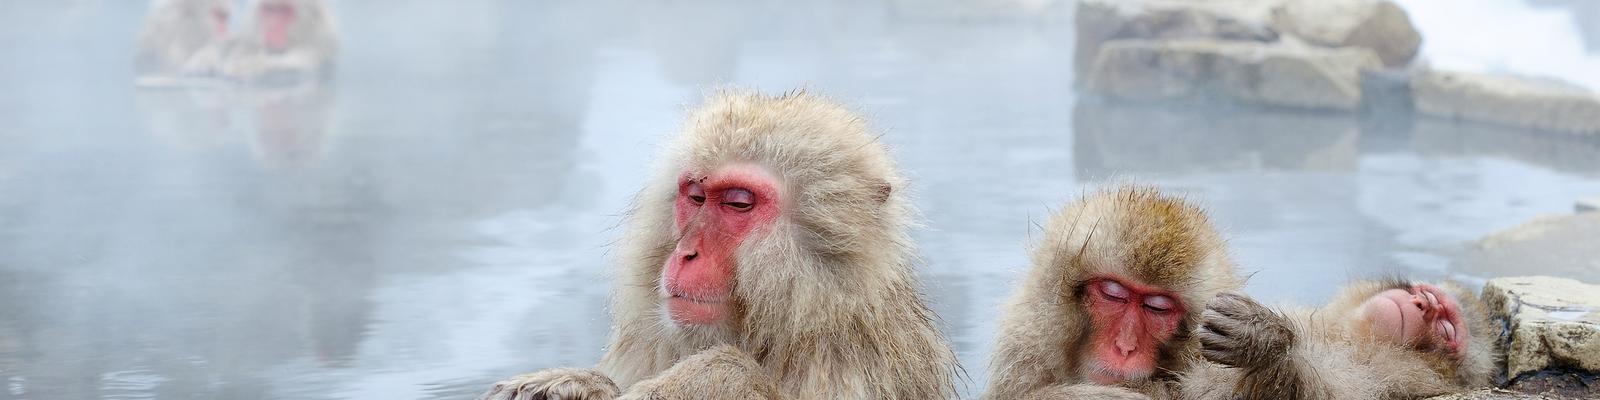 Snow Monkey standing on the edge of outdoor hot spring